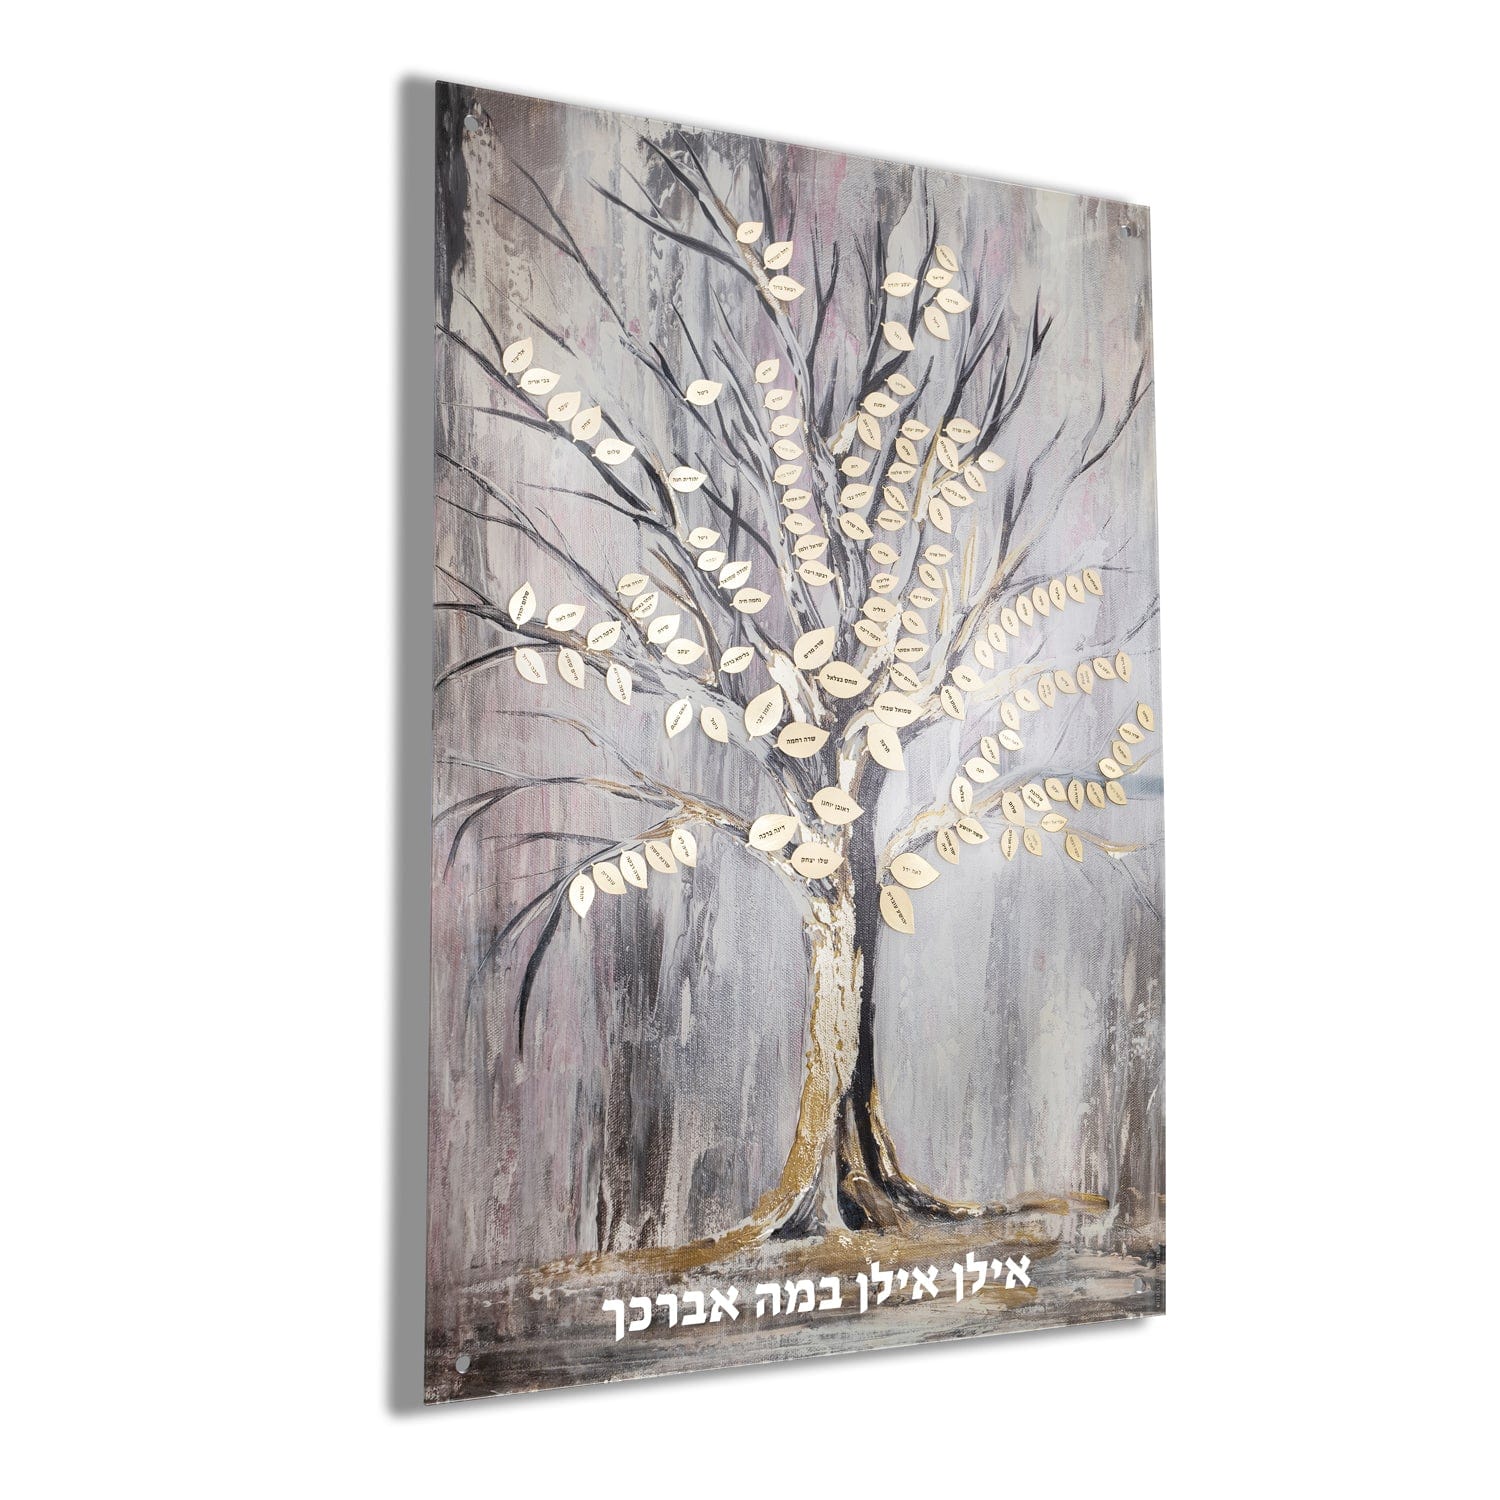 Painted Family Tree - Waterdale Collection